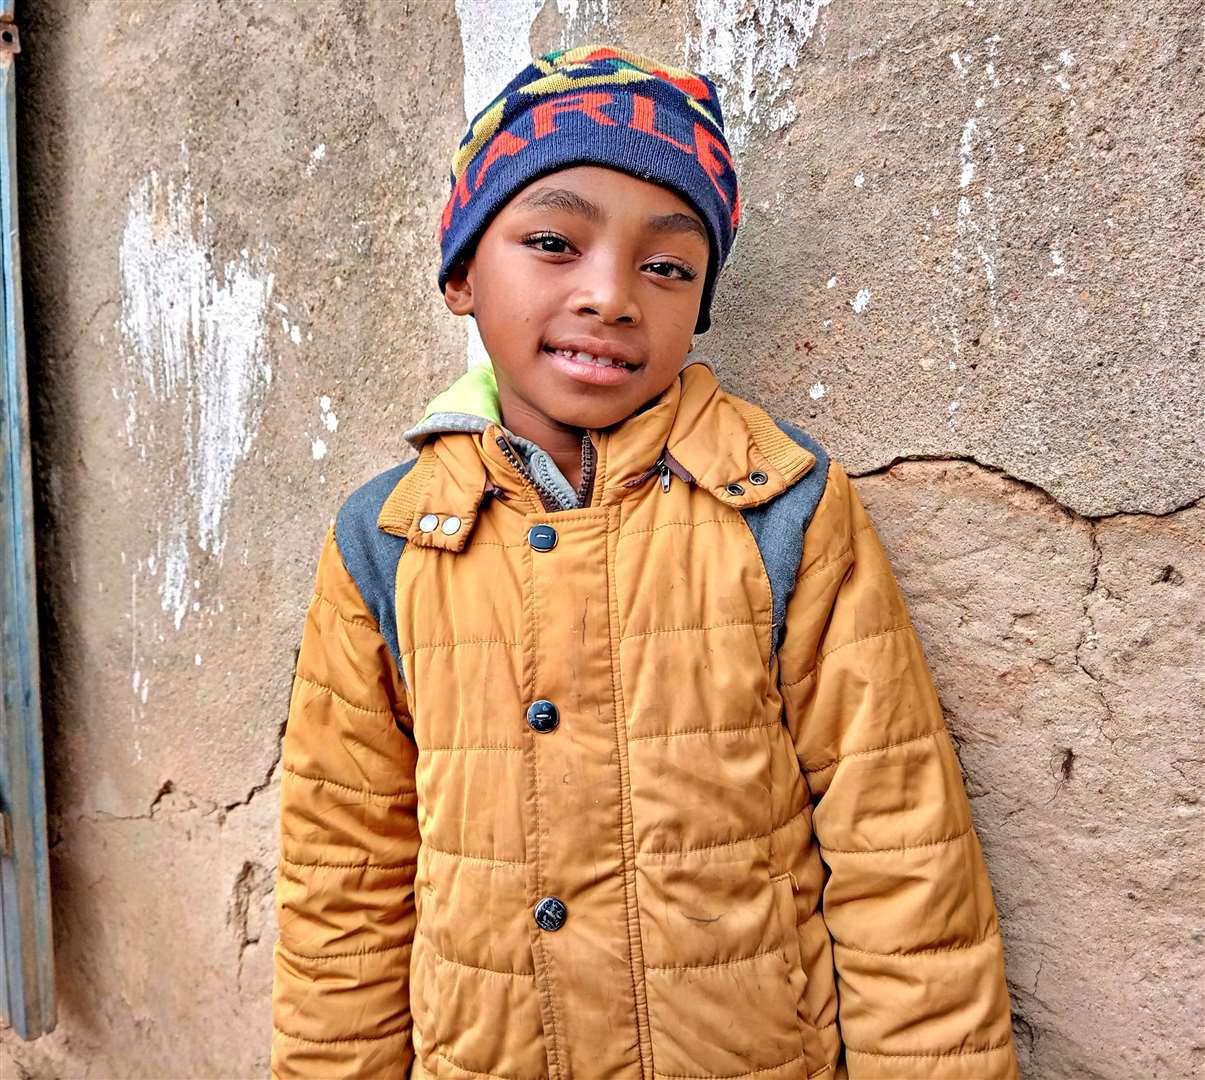 Joseph from Madagascar is one of the thousands of children around the world benefitting from the support of Mary's Meals.